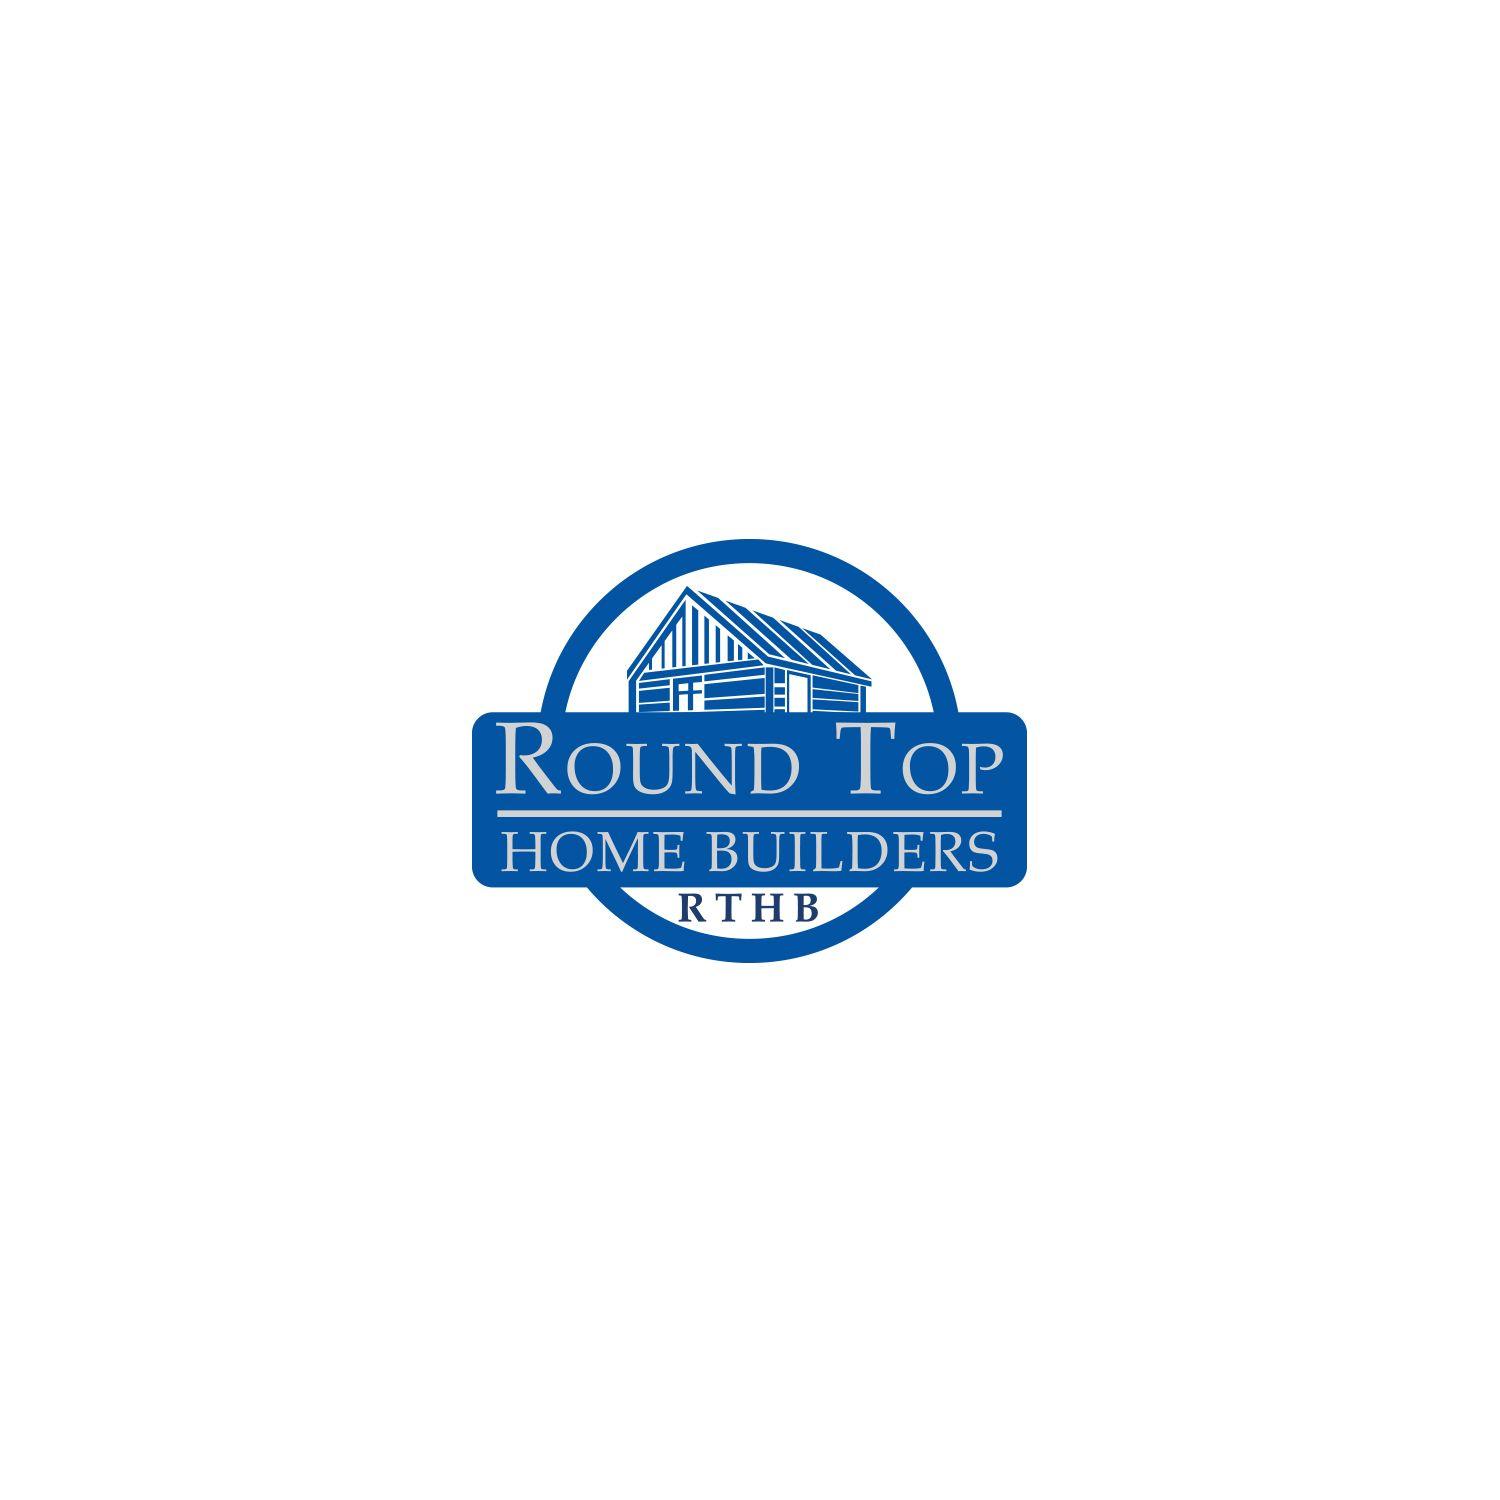 Blue Round Popular Company Logo - Bold, Professional, Residential Construction Logo Design for Round ...